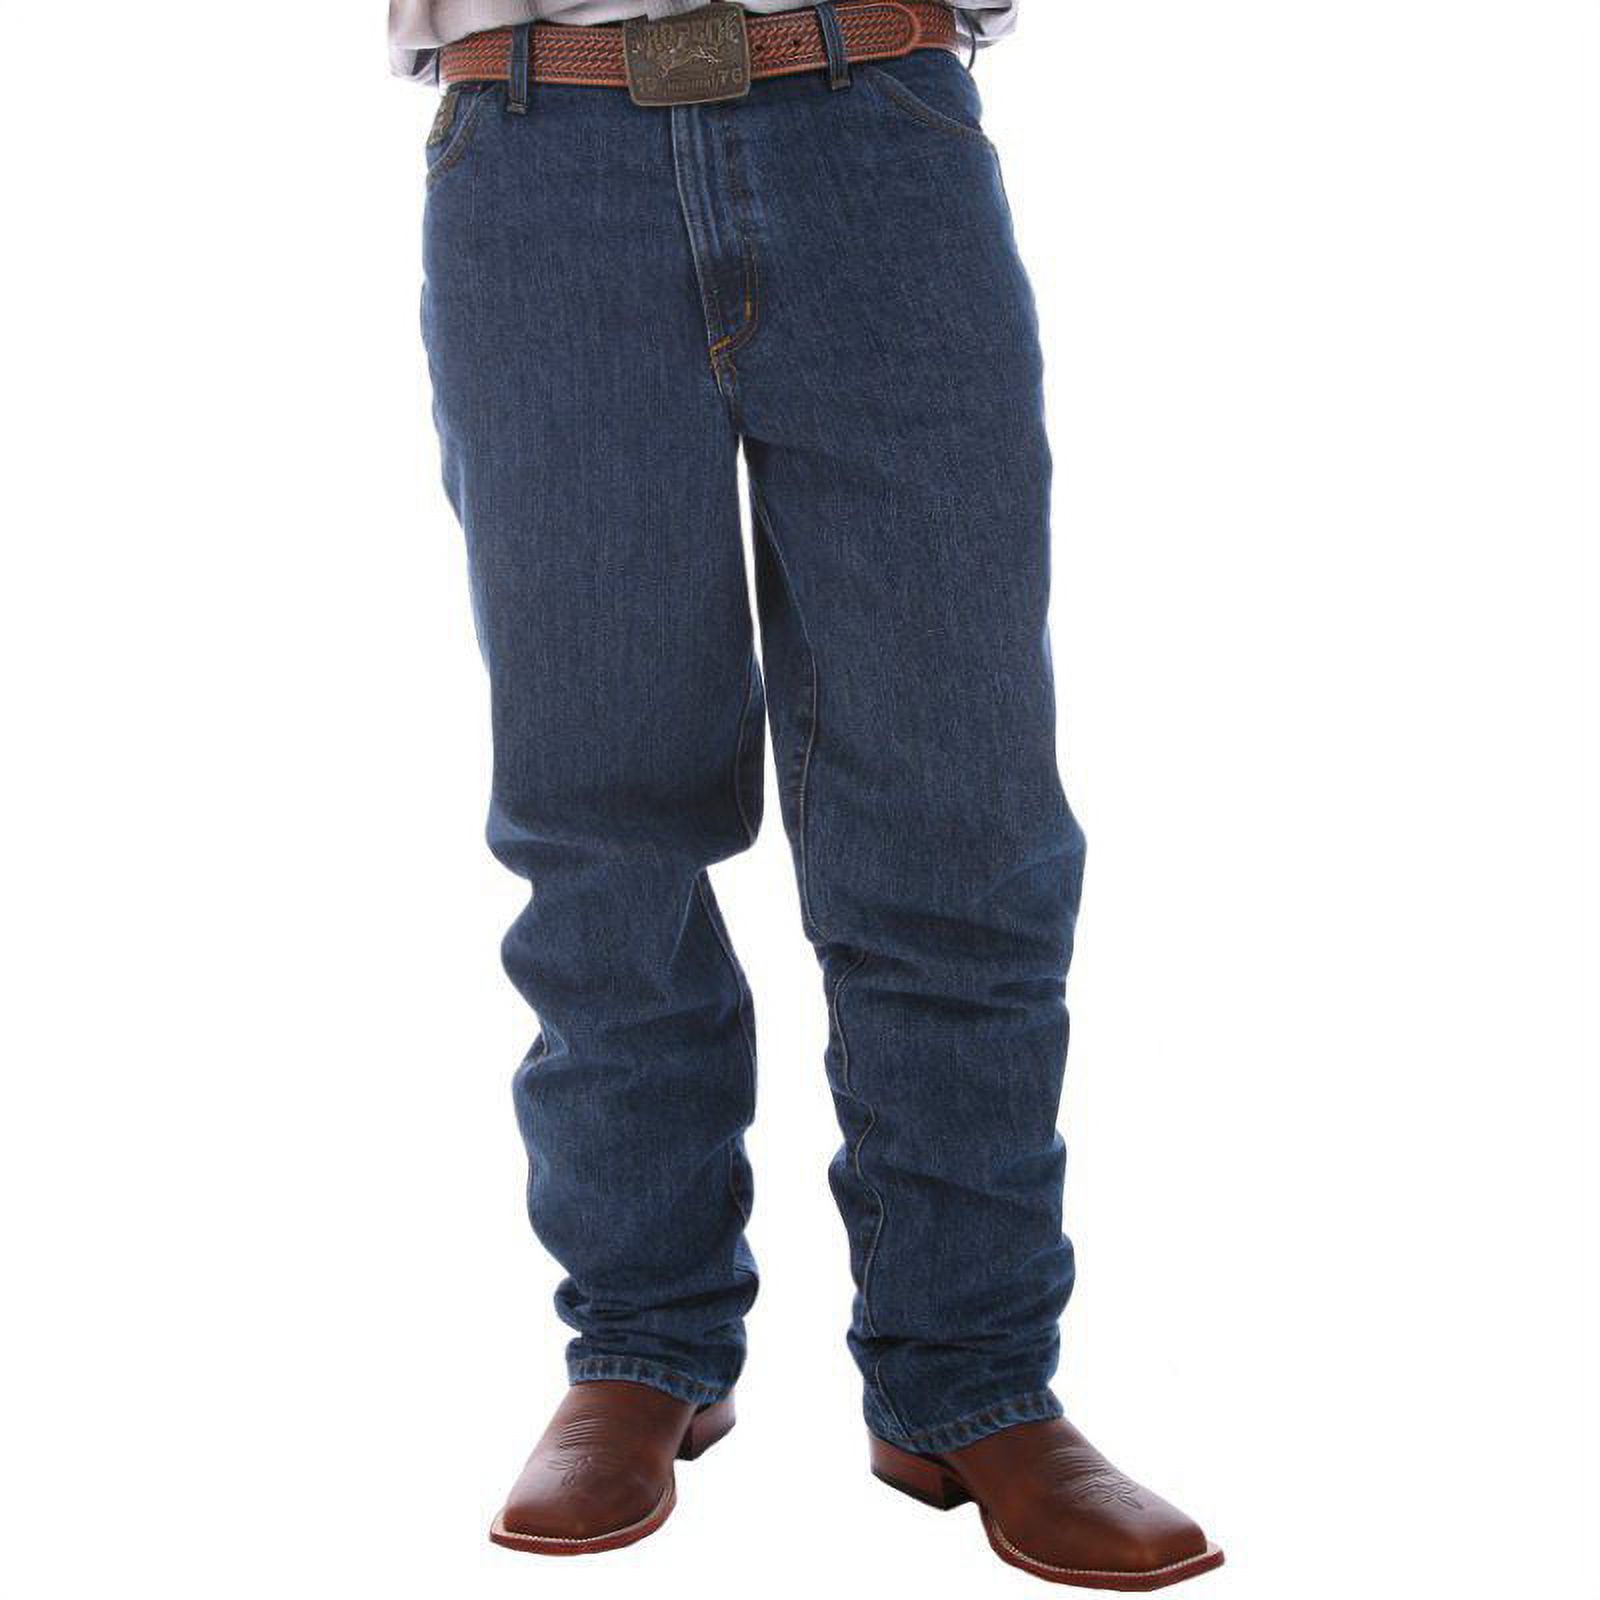 Cinch Men's Green Label Relaxed Fit Dark Stonewash Jeans Dark Stone 33W x 34L  US - image 2 of 4